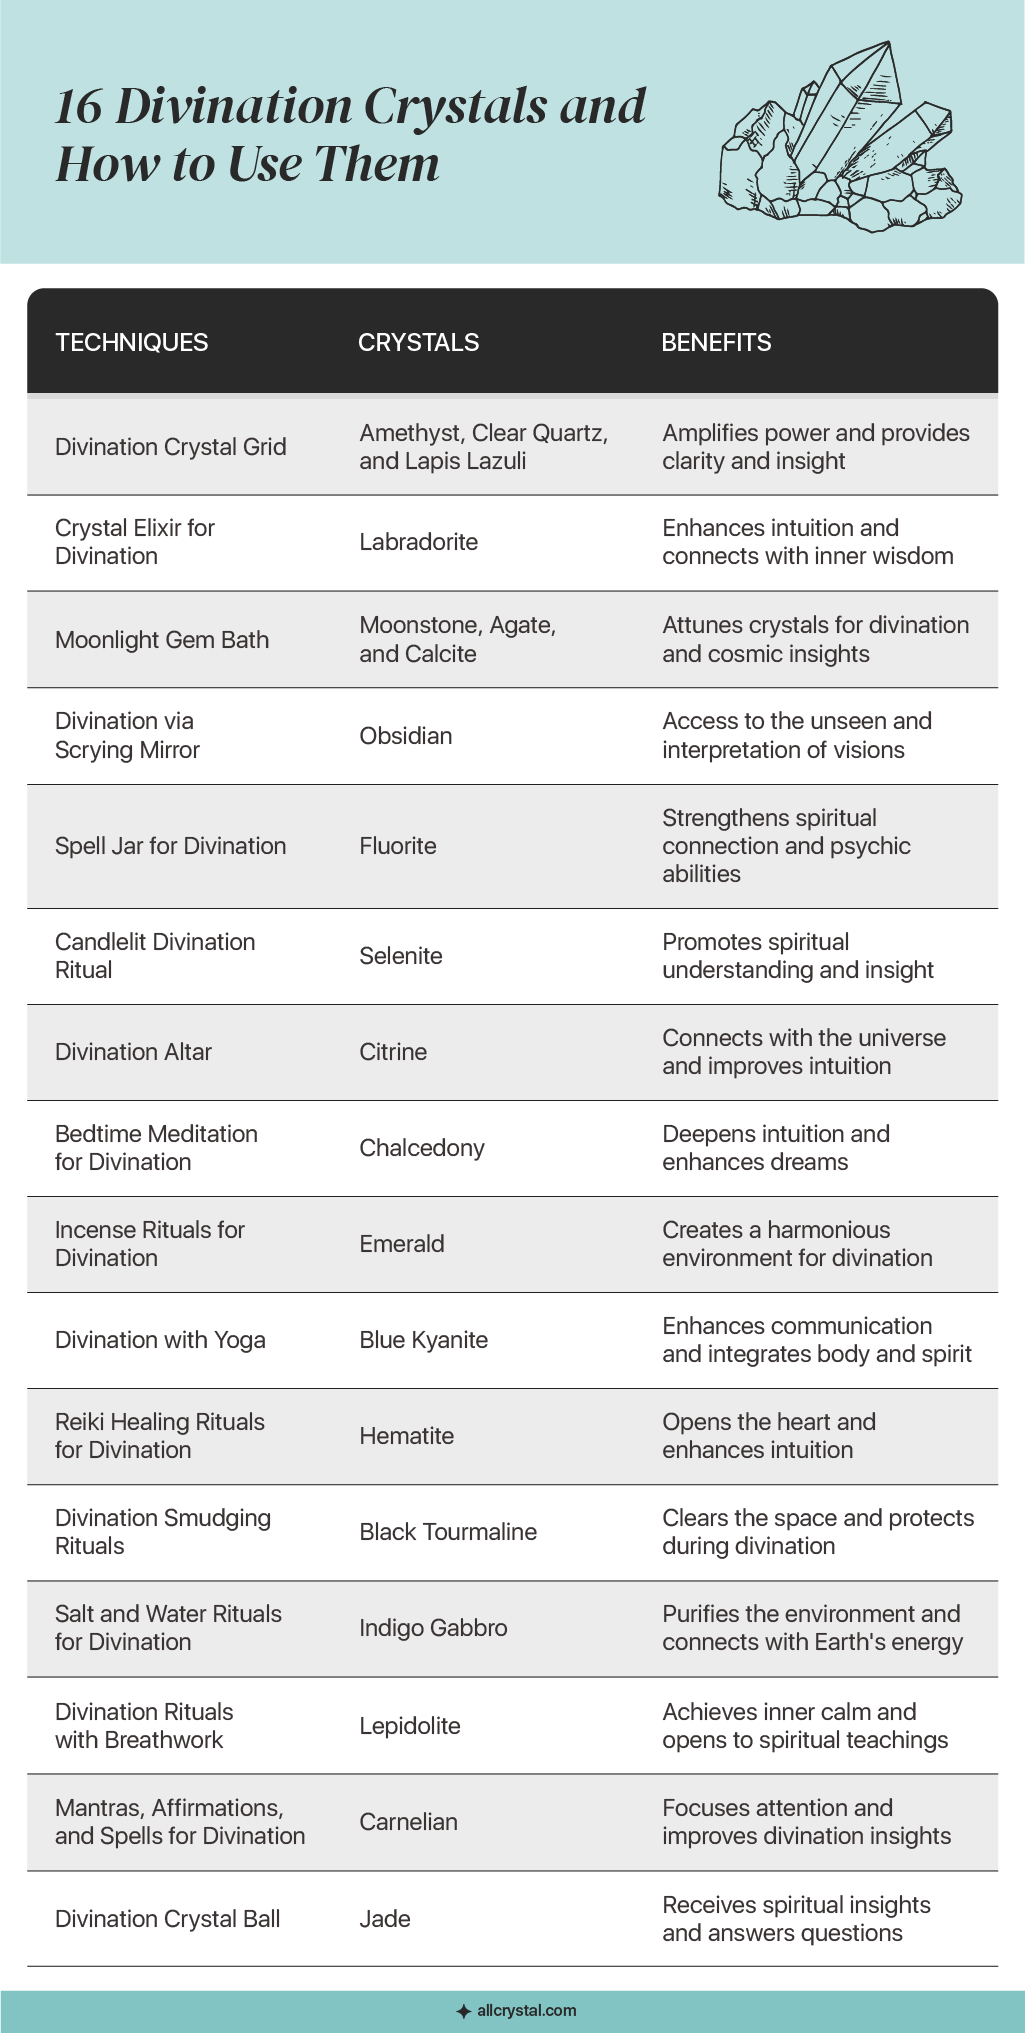 A graphic table containing information about 16 Divination Crystals and How to Use Them